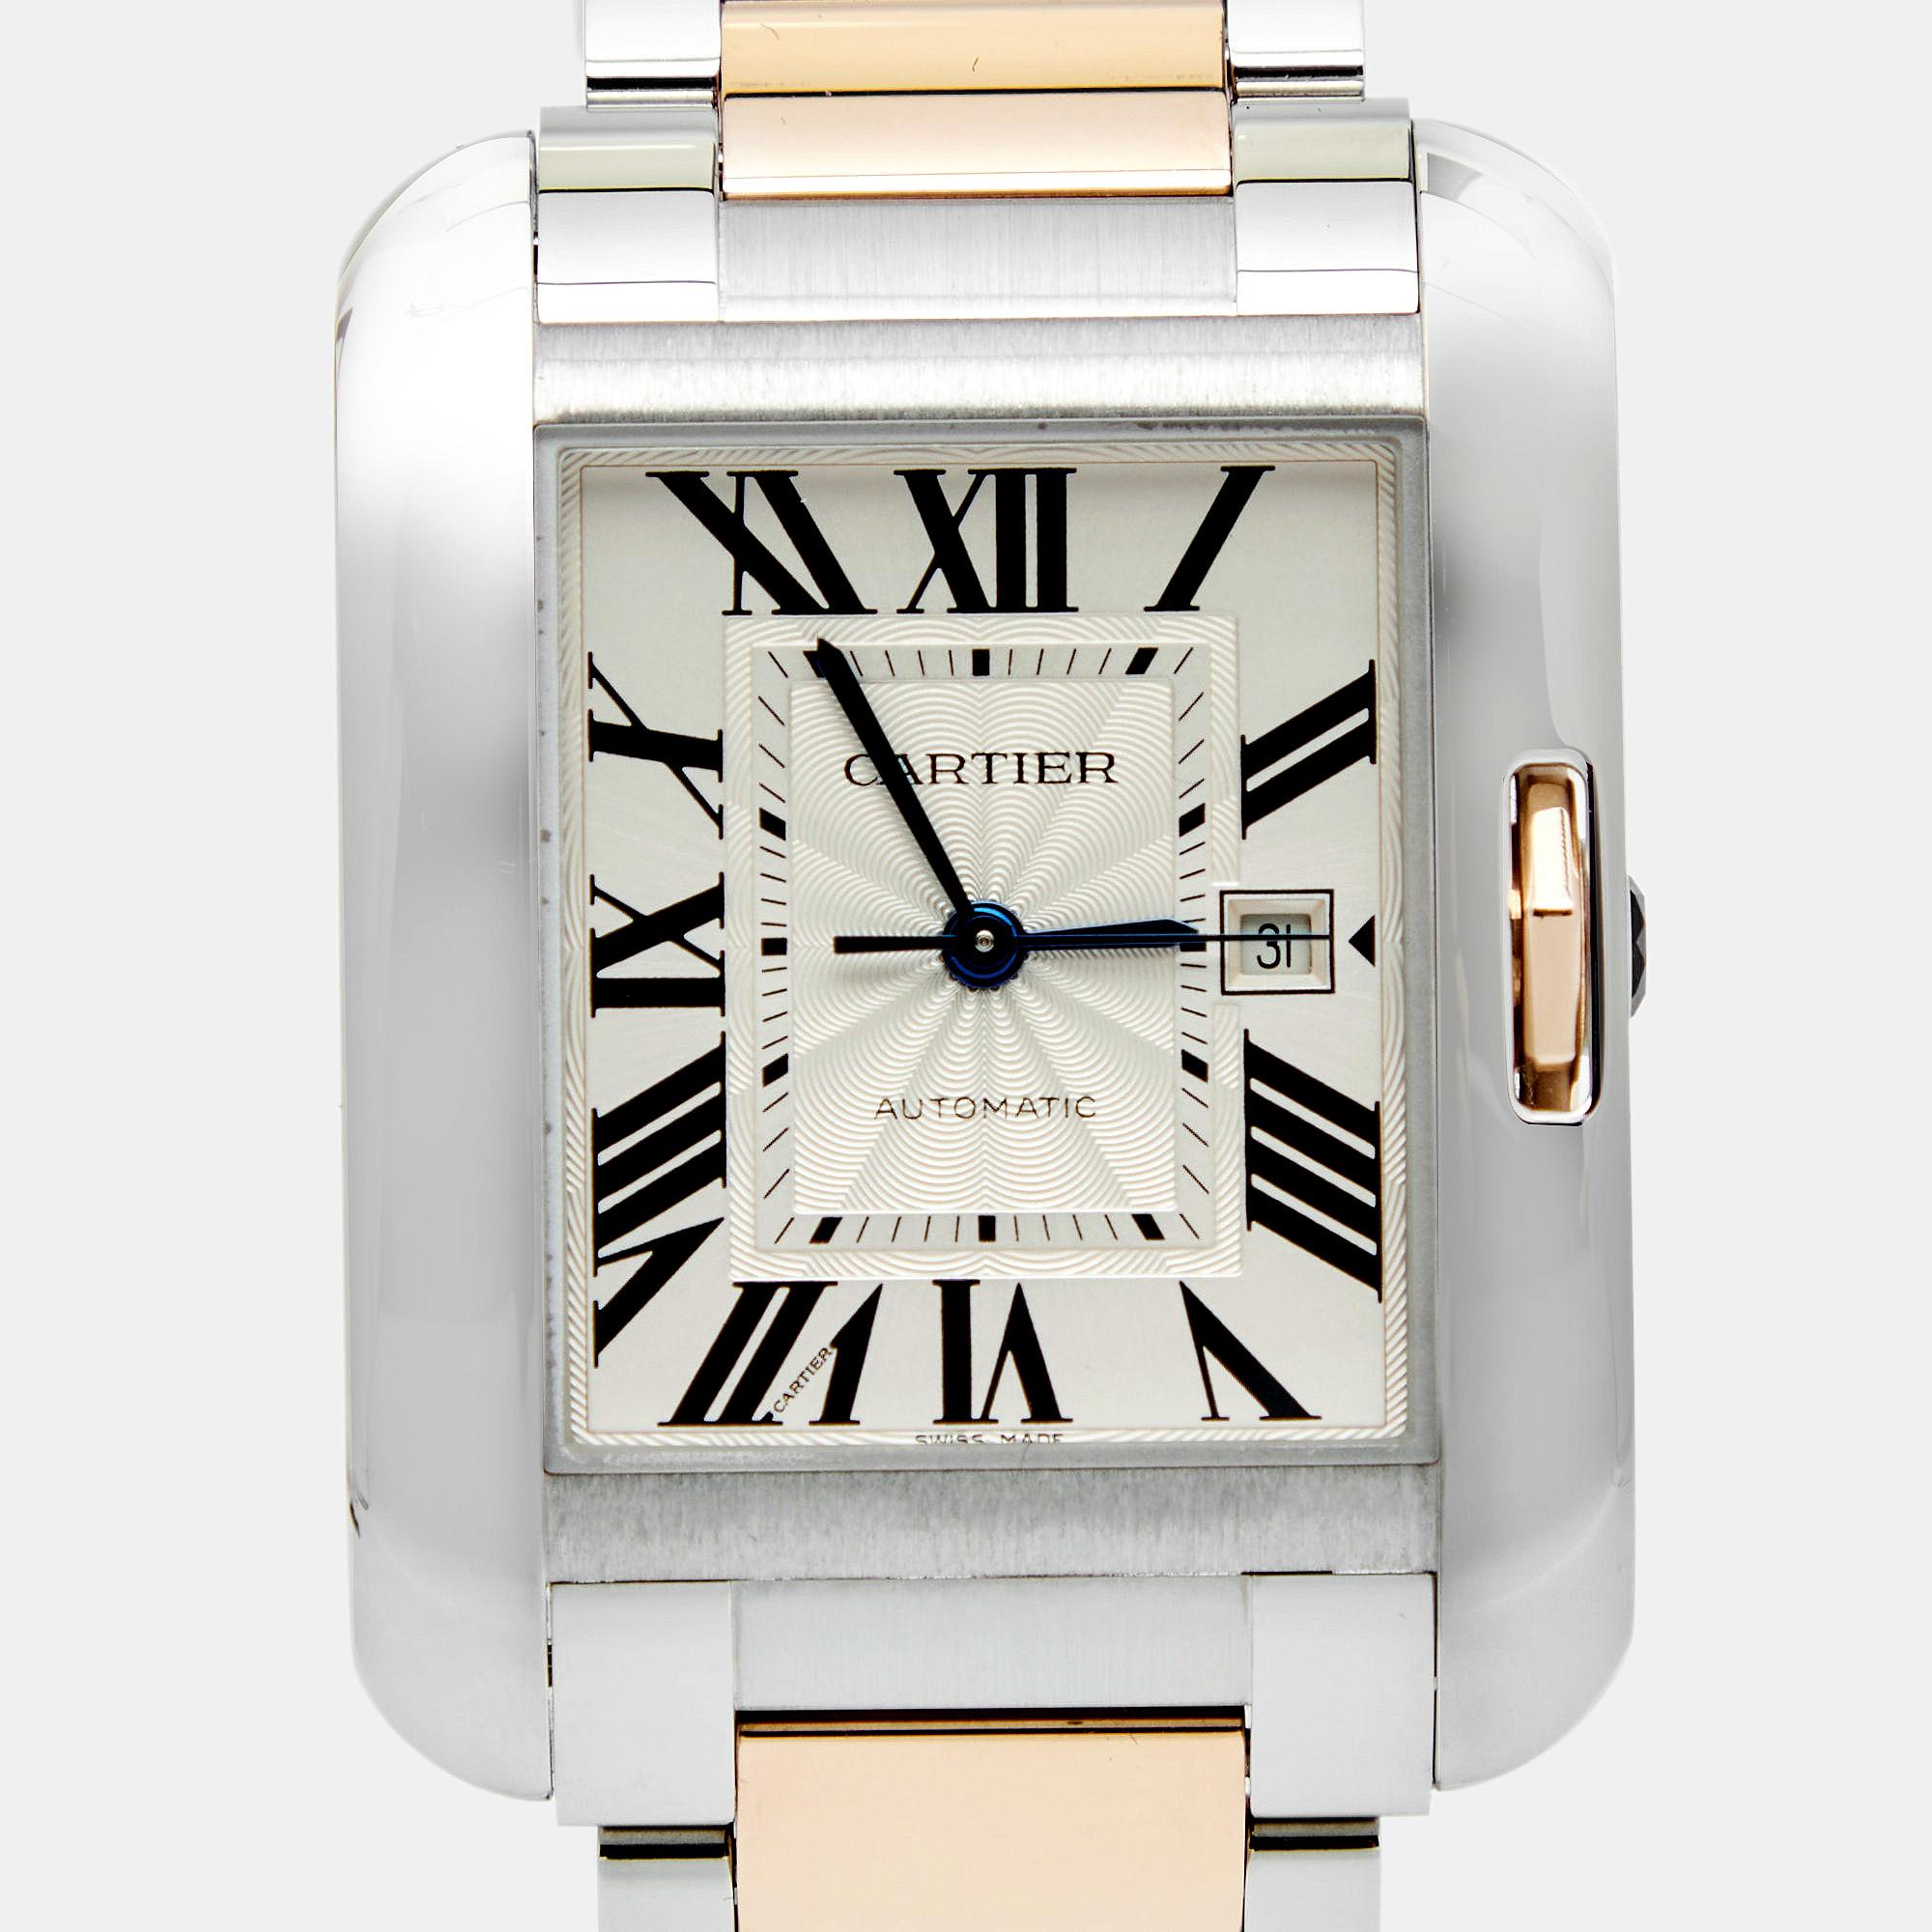 This Cartier timepiece is a must-have creation for watch enthusiasts! Made using 18k rose gold and stainless steel, this Tank Anglaise watch has a silver dial with Roman numeral hour markers, a date window, and three steel hands in a blue hue.